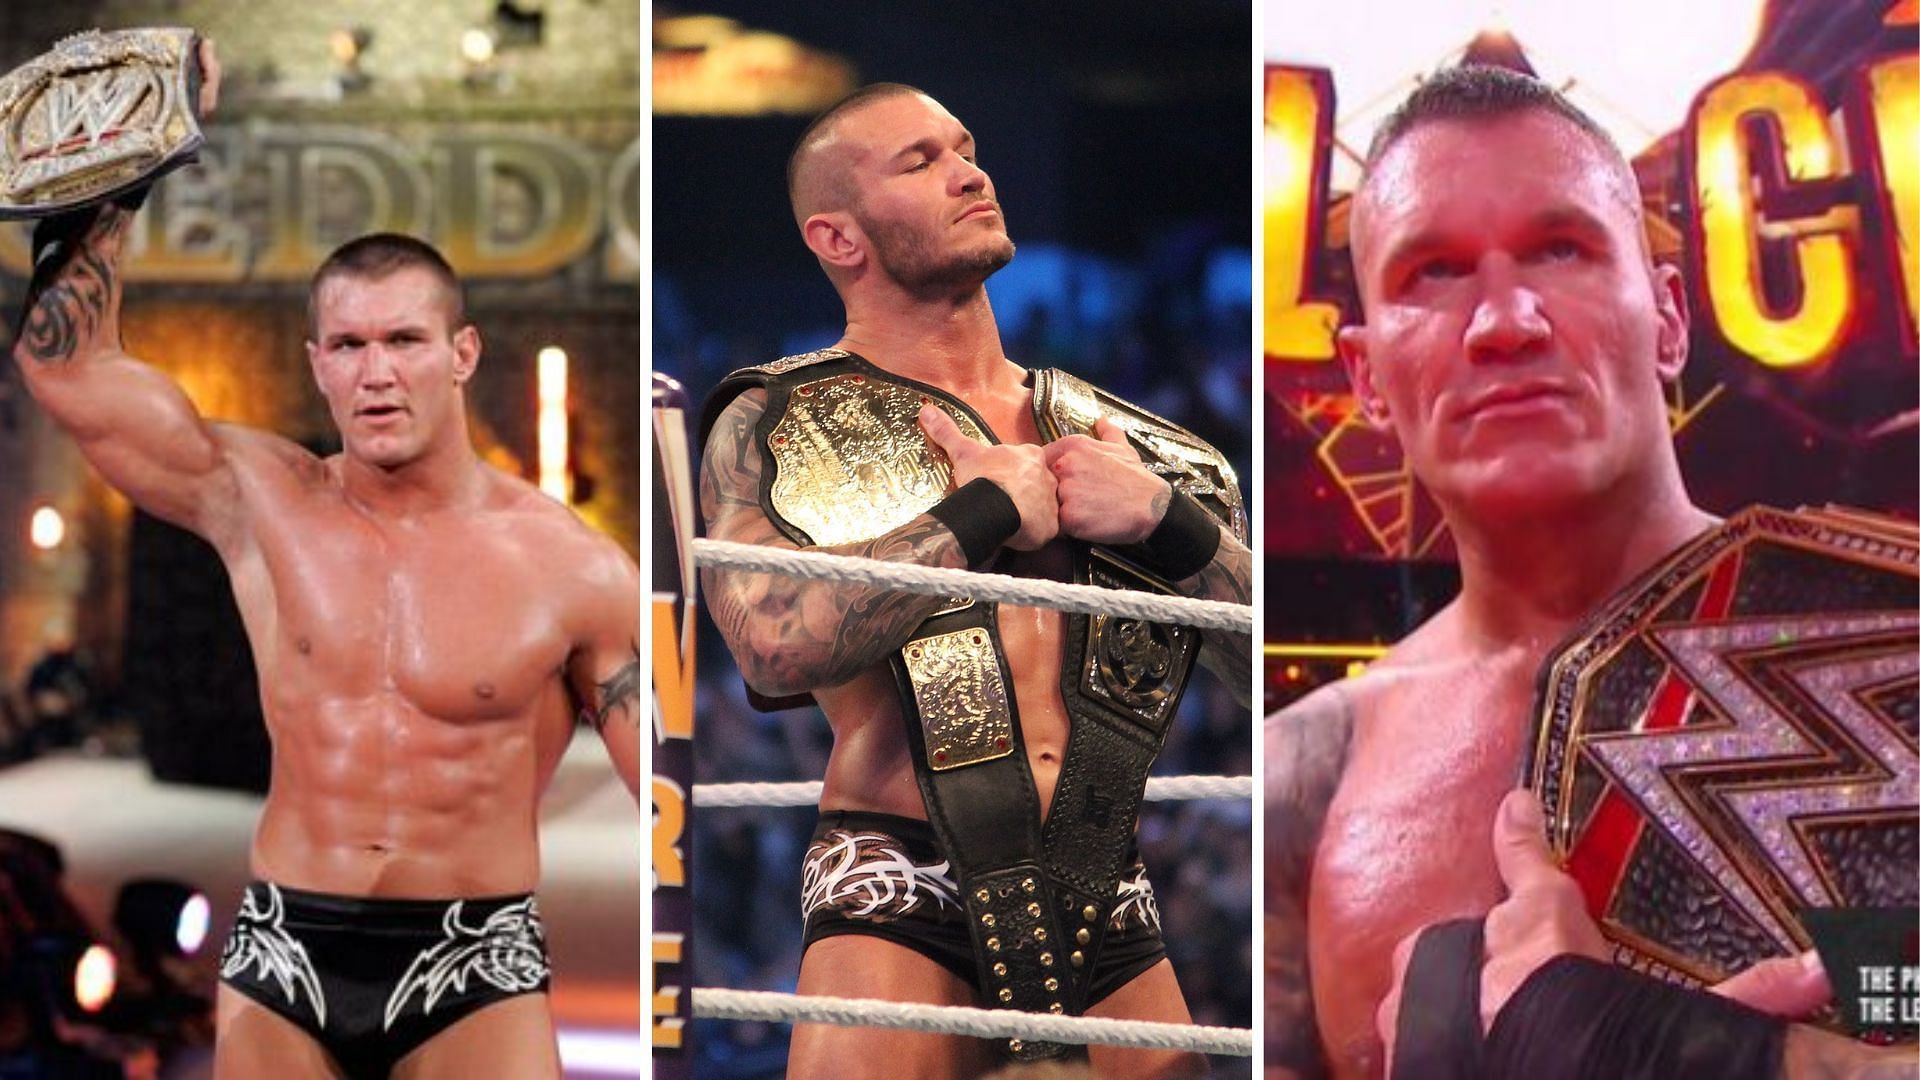 Randy Orton is a 14-time World Champion.